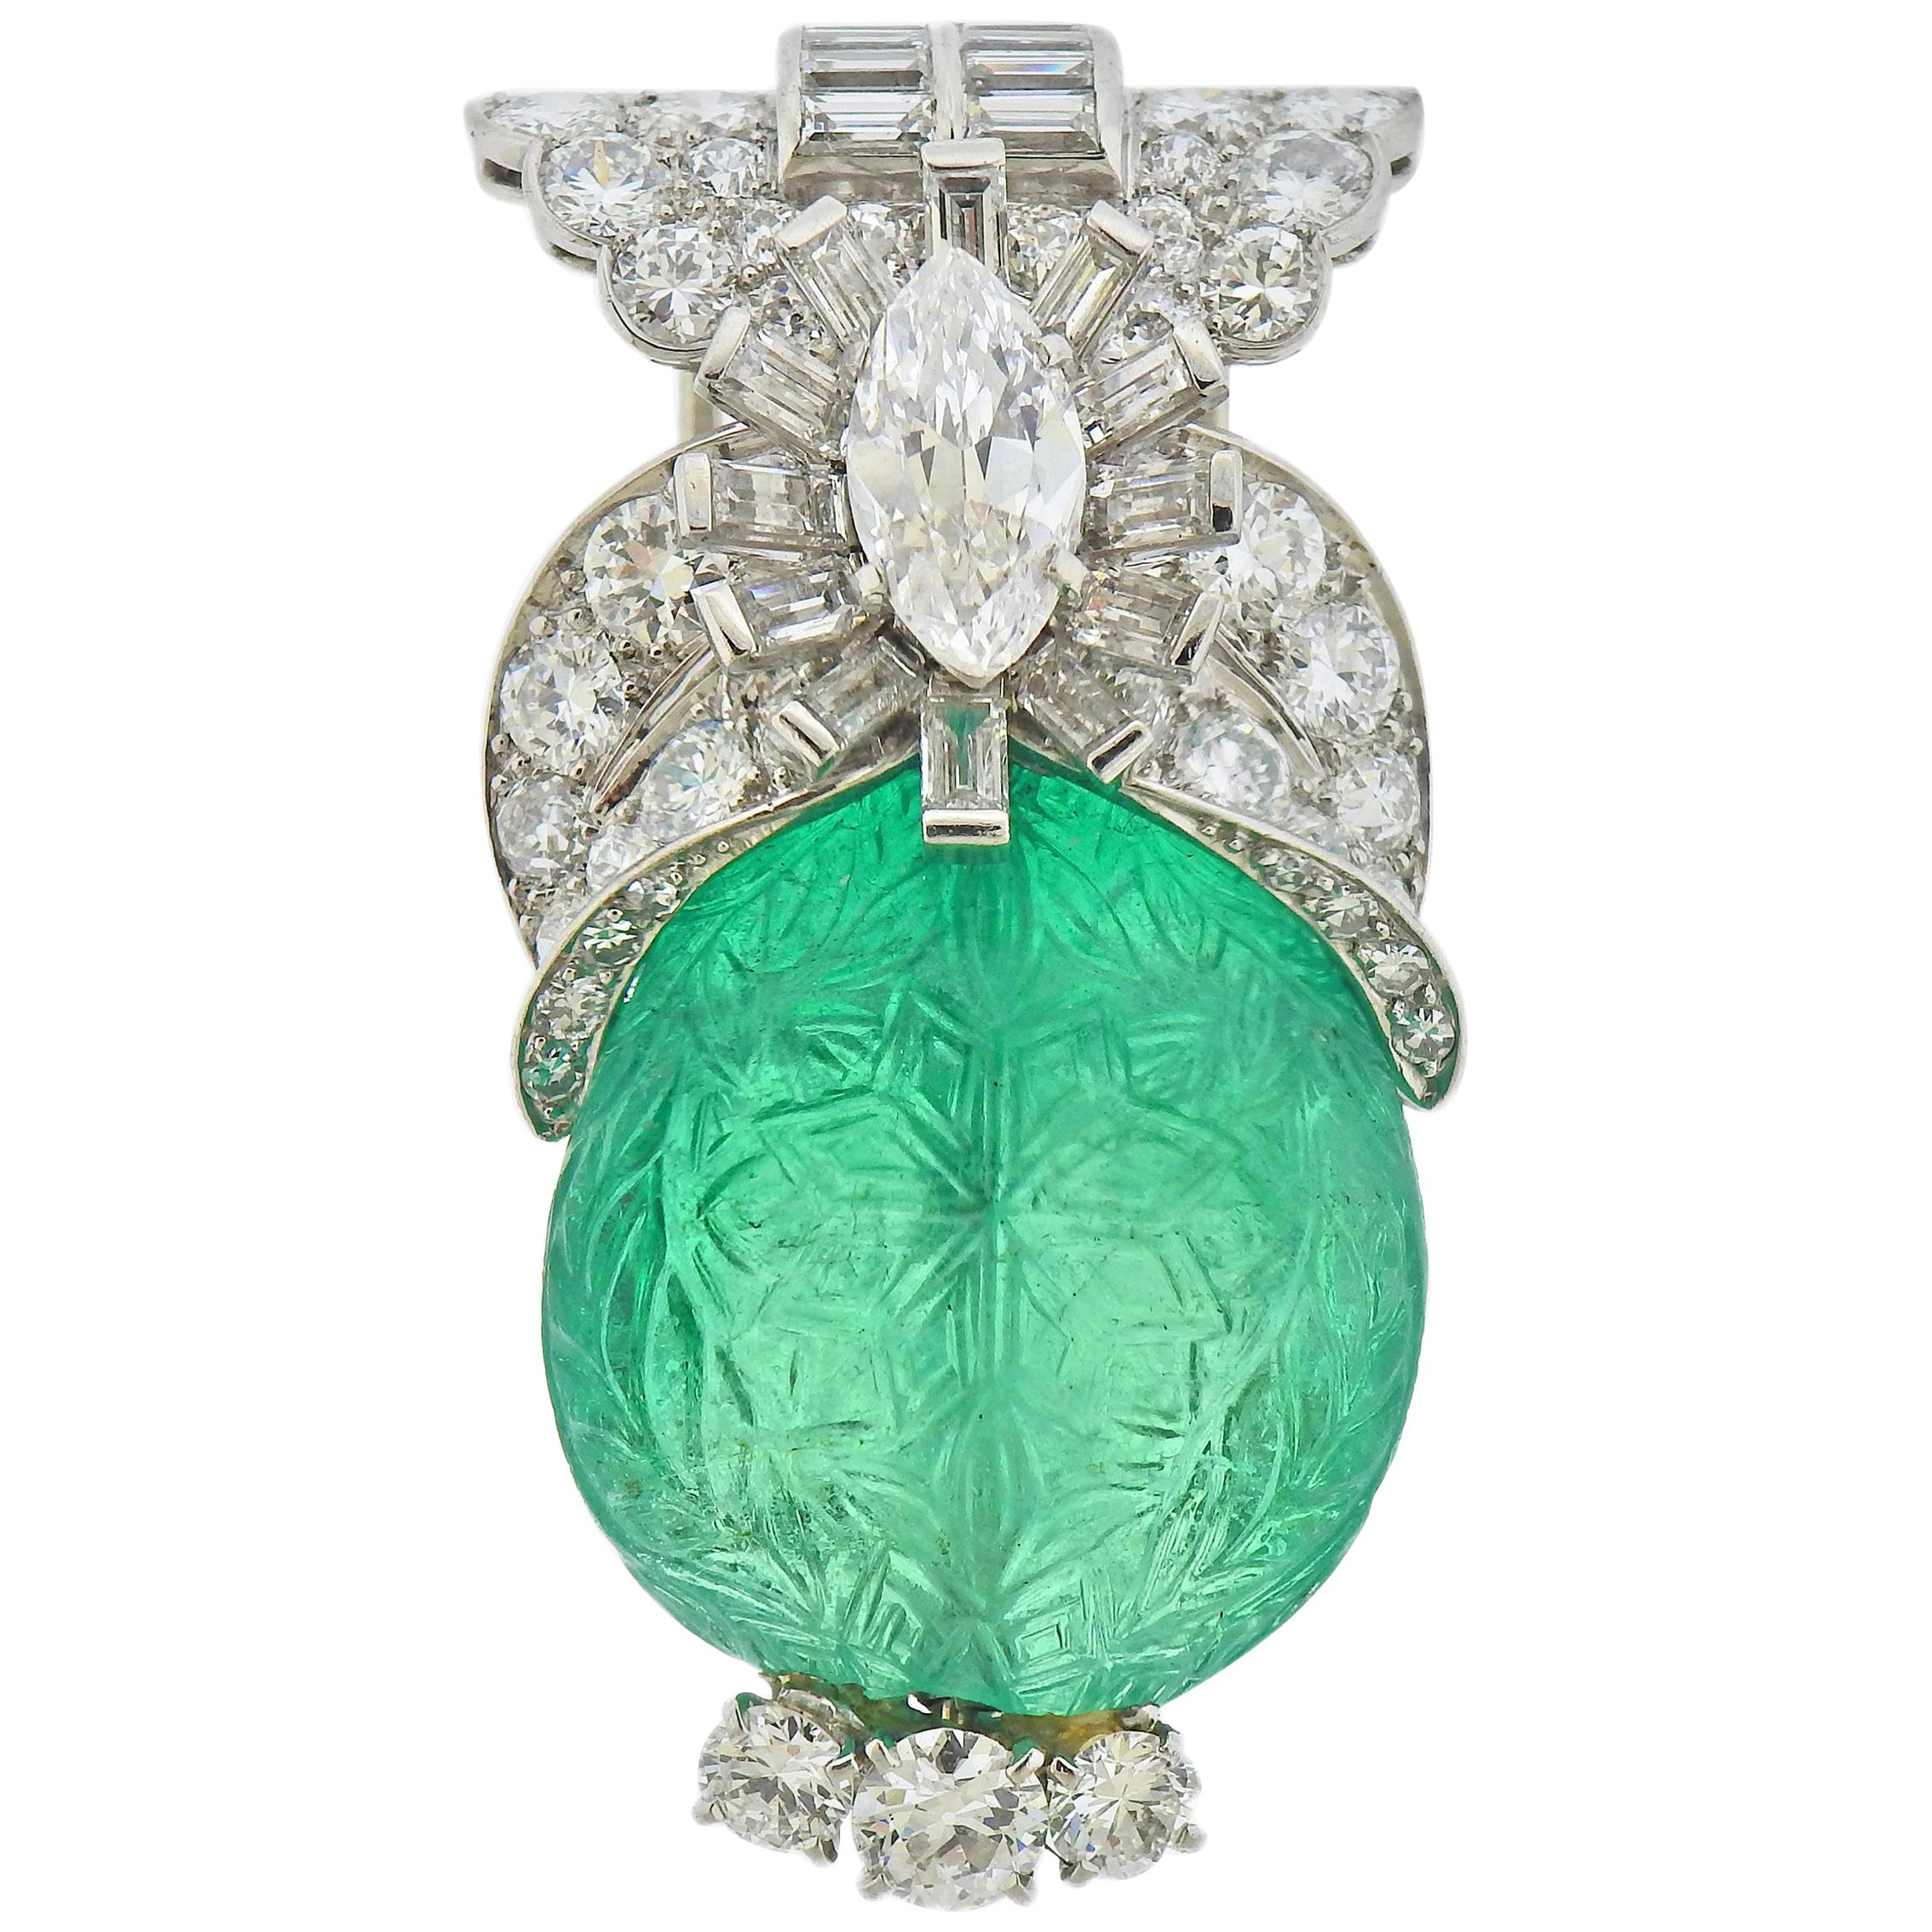 Cartier approximately 65 Carat Carved Colombian Emerald Diamond Platinum Brooch